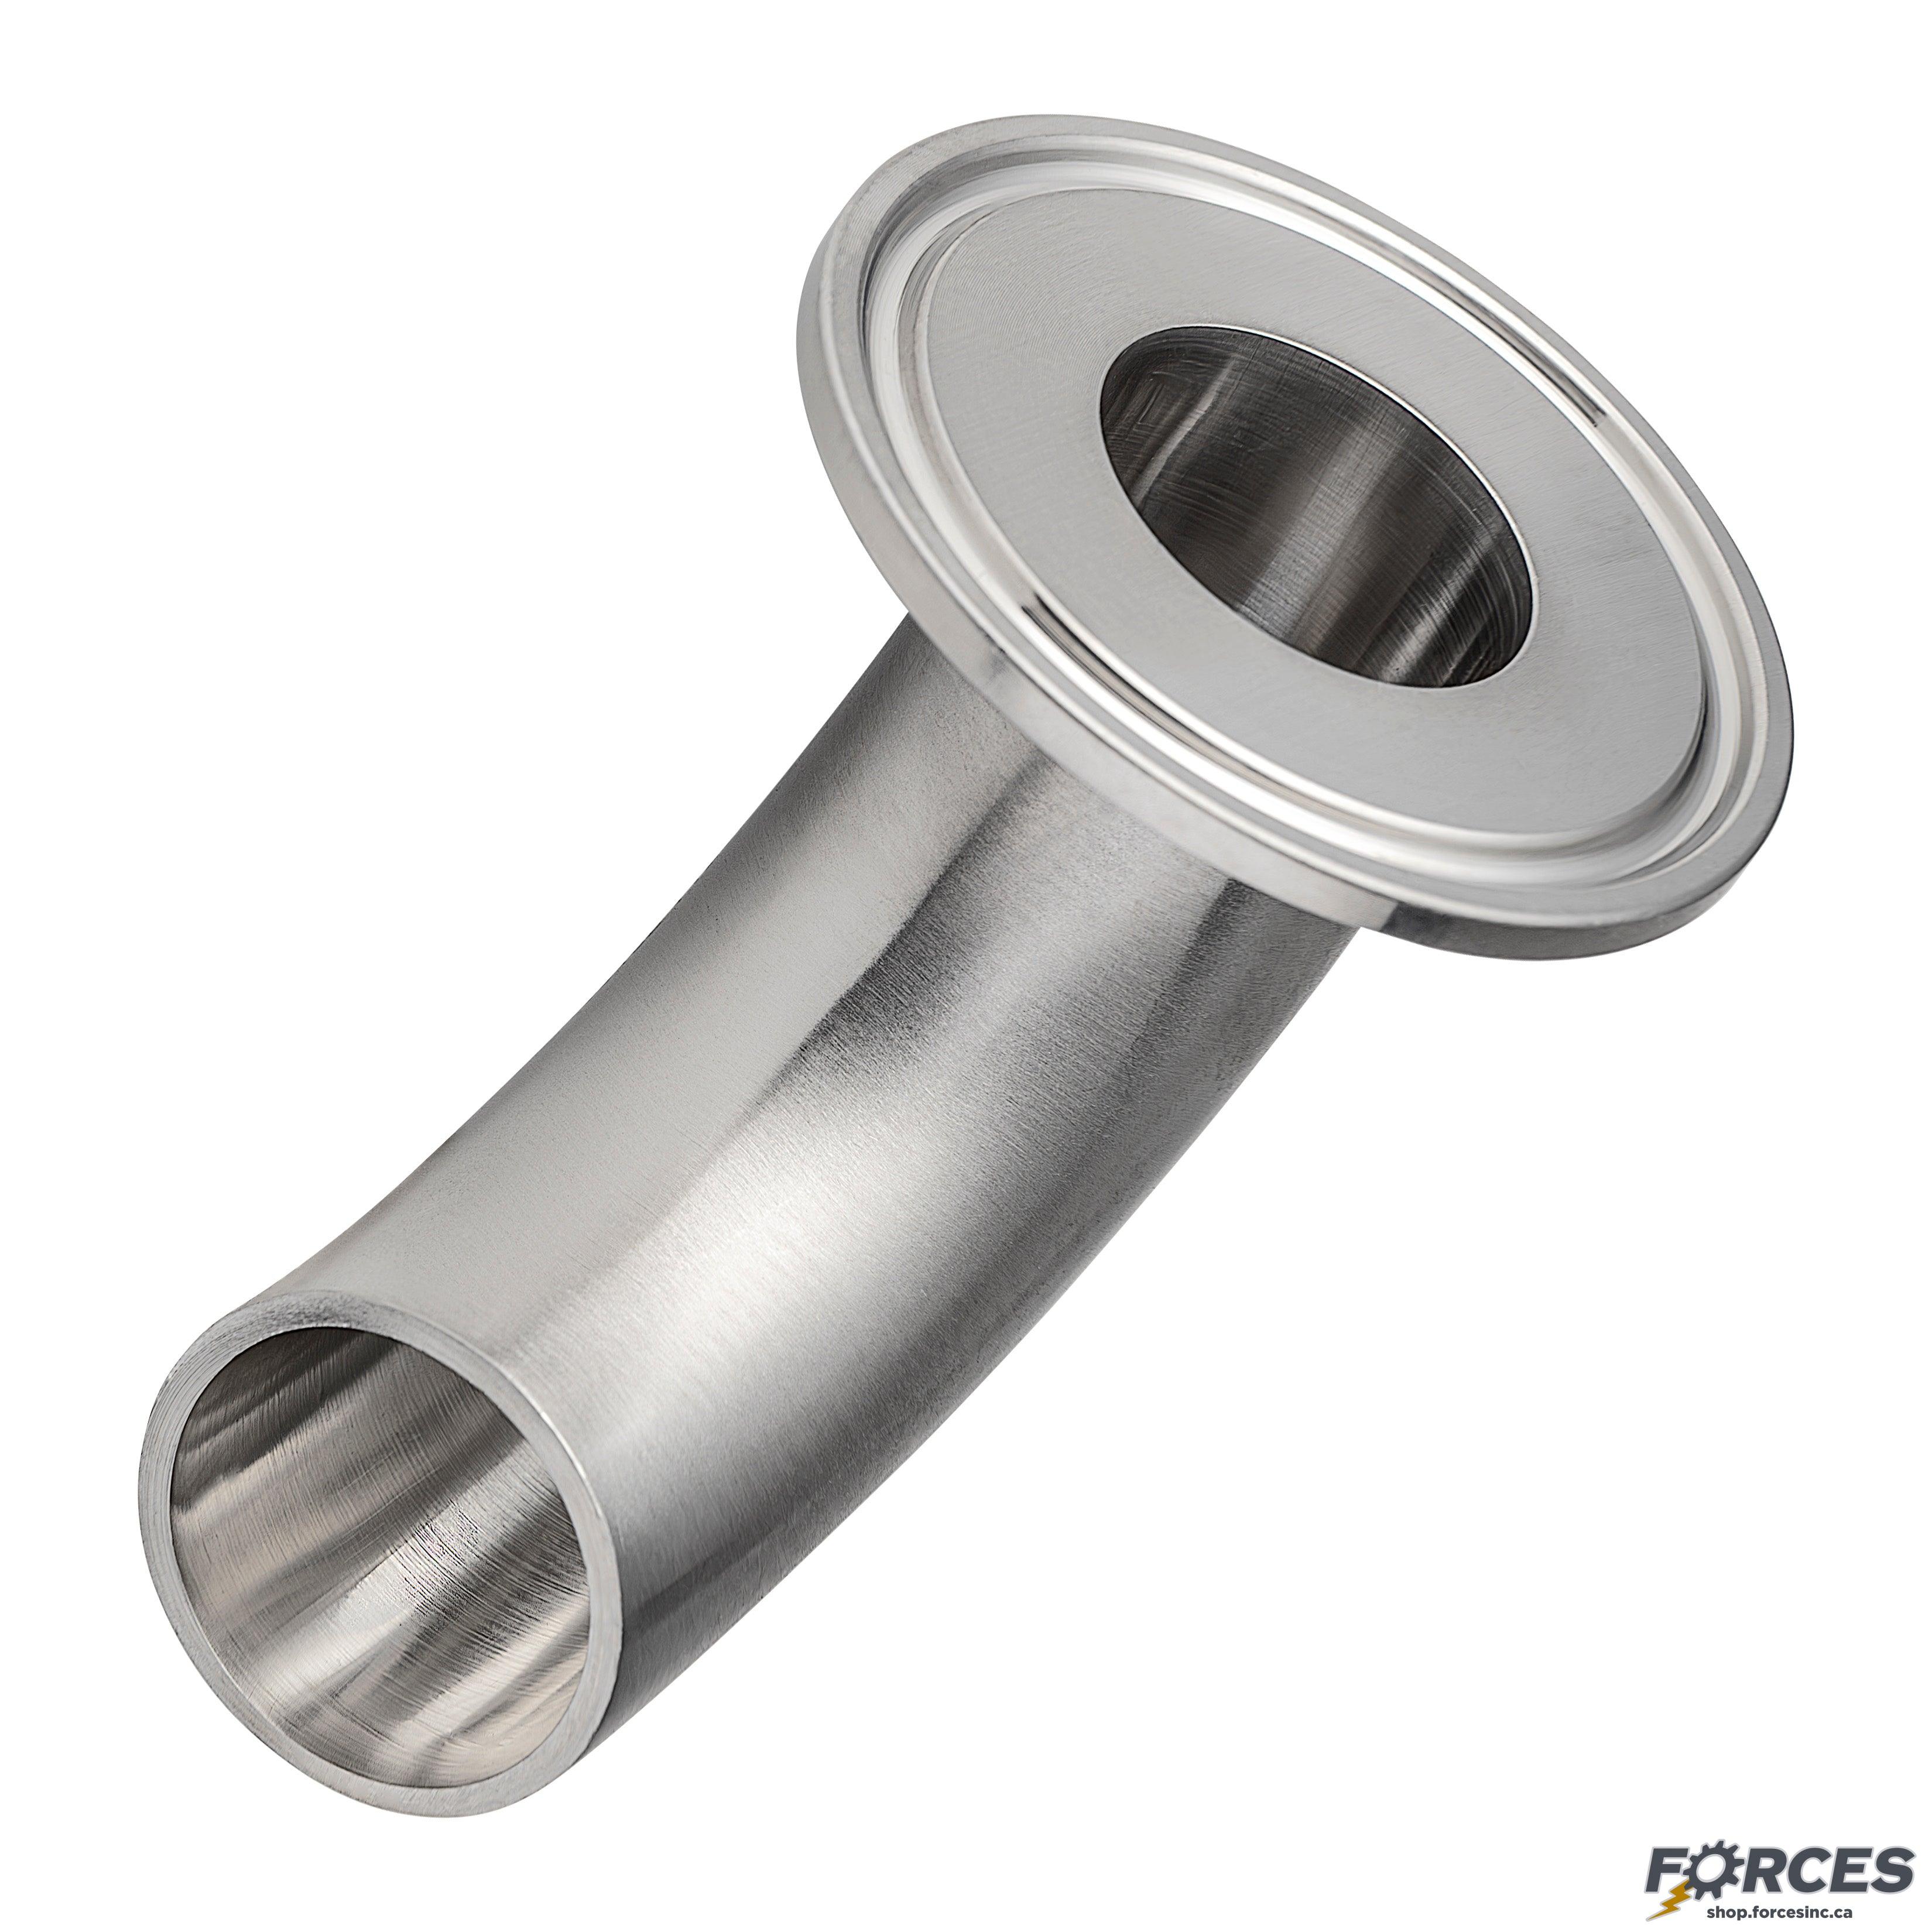 1-1/2" 90° Elbow Tri-Clamp x Buttweld - Stainless Steel 316 - Forces Inc